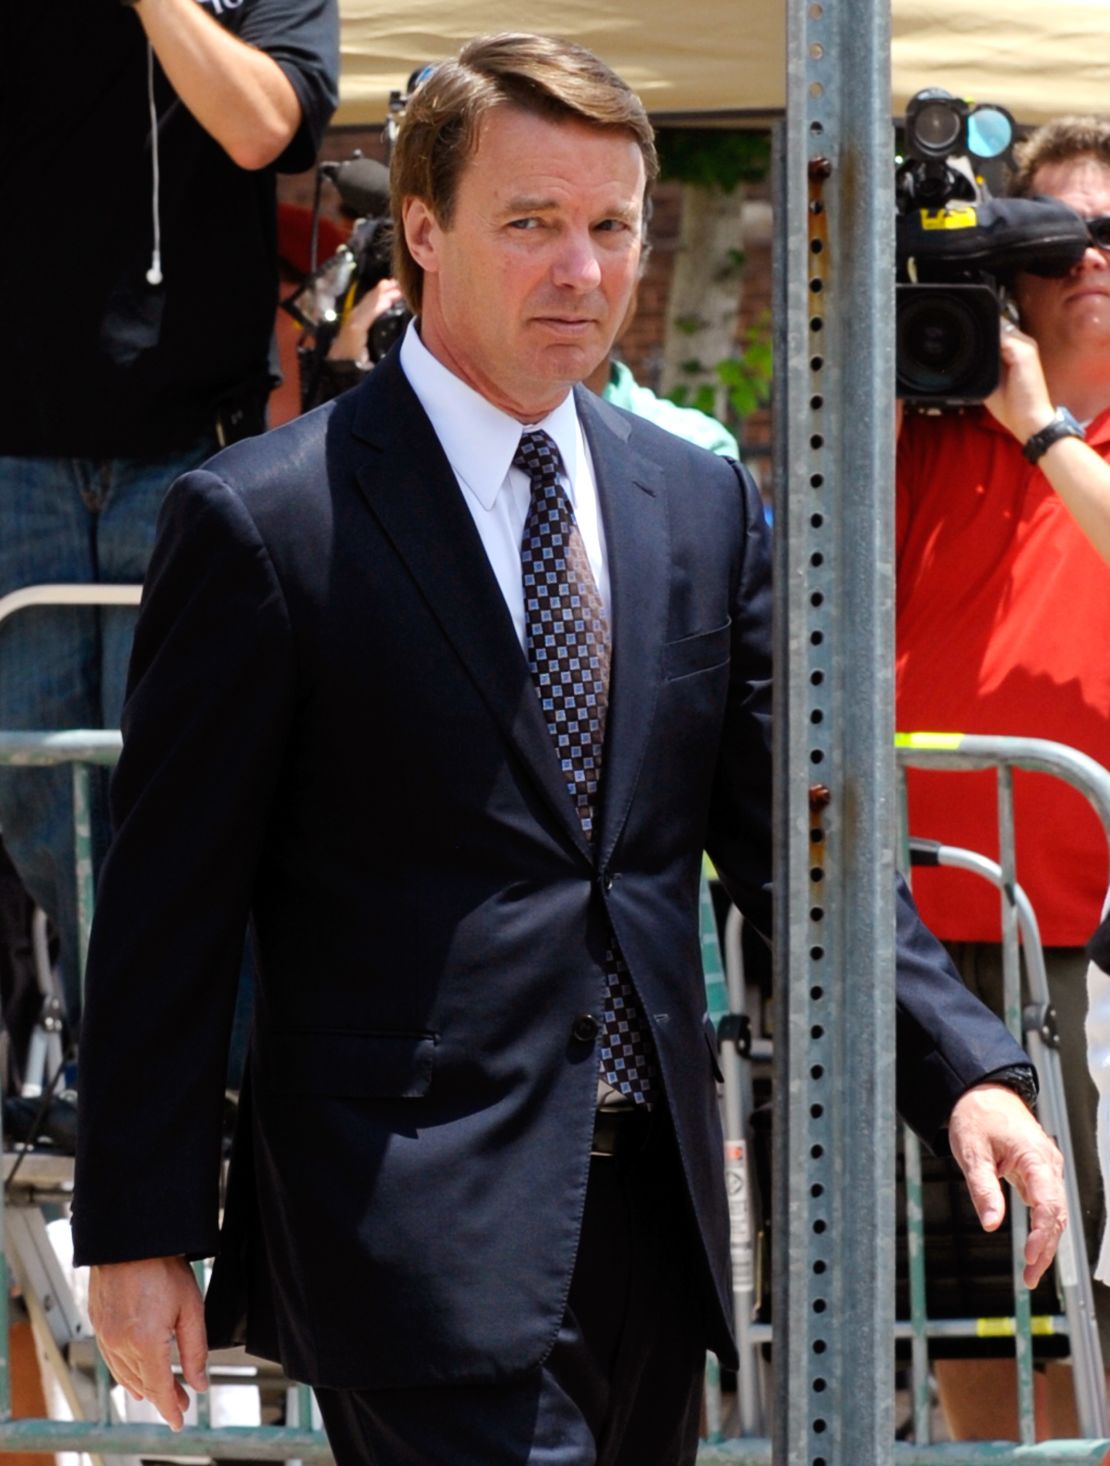 Former senator John Edwards was brought down by a sex scandal.